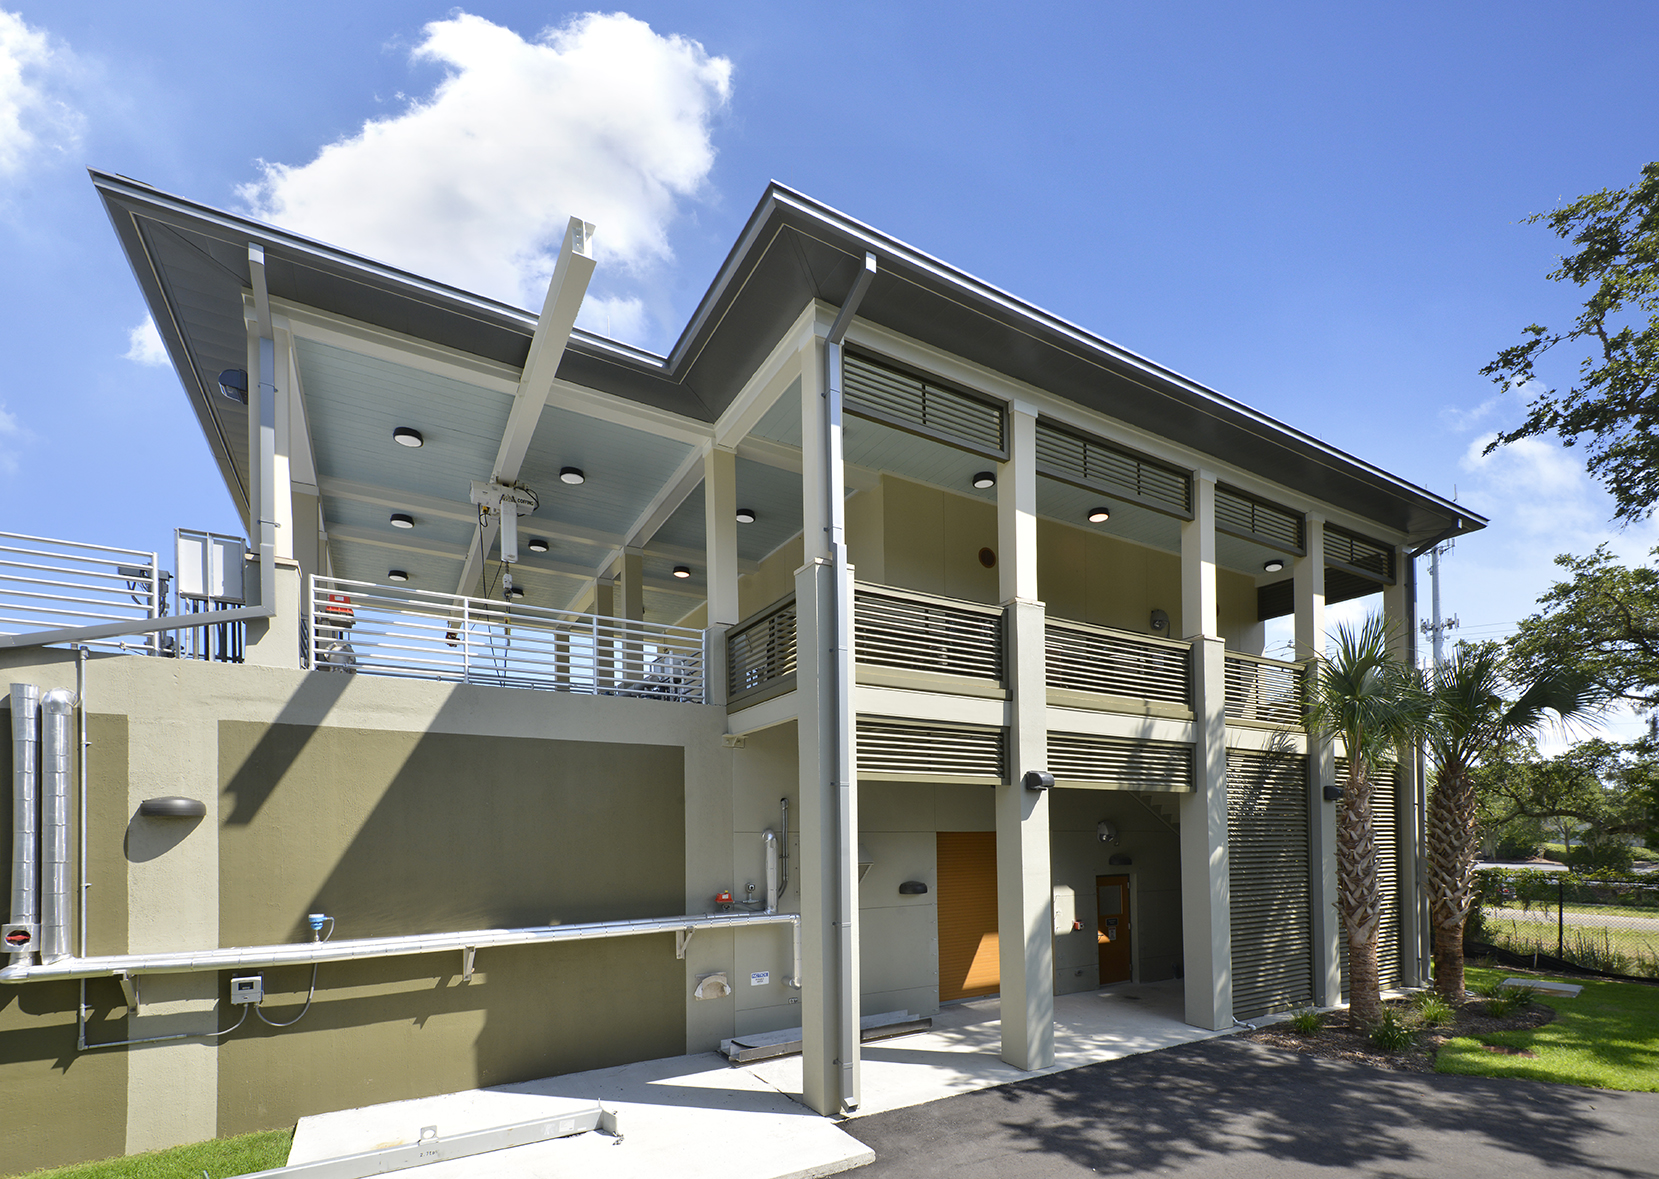 Commercial Architectural Services for Isle of Palms